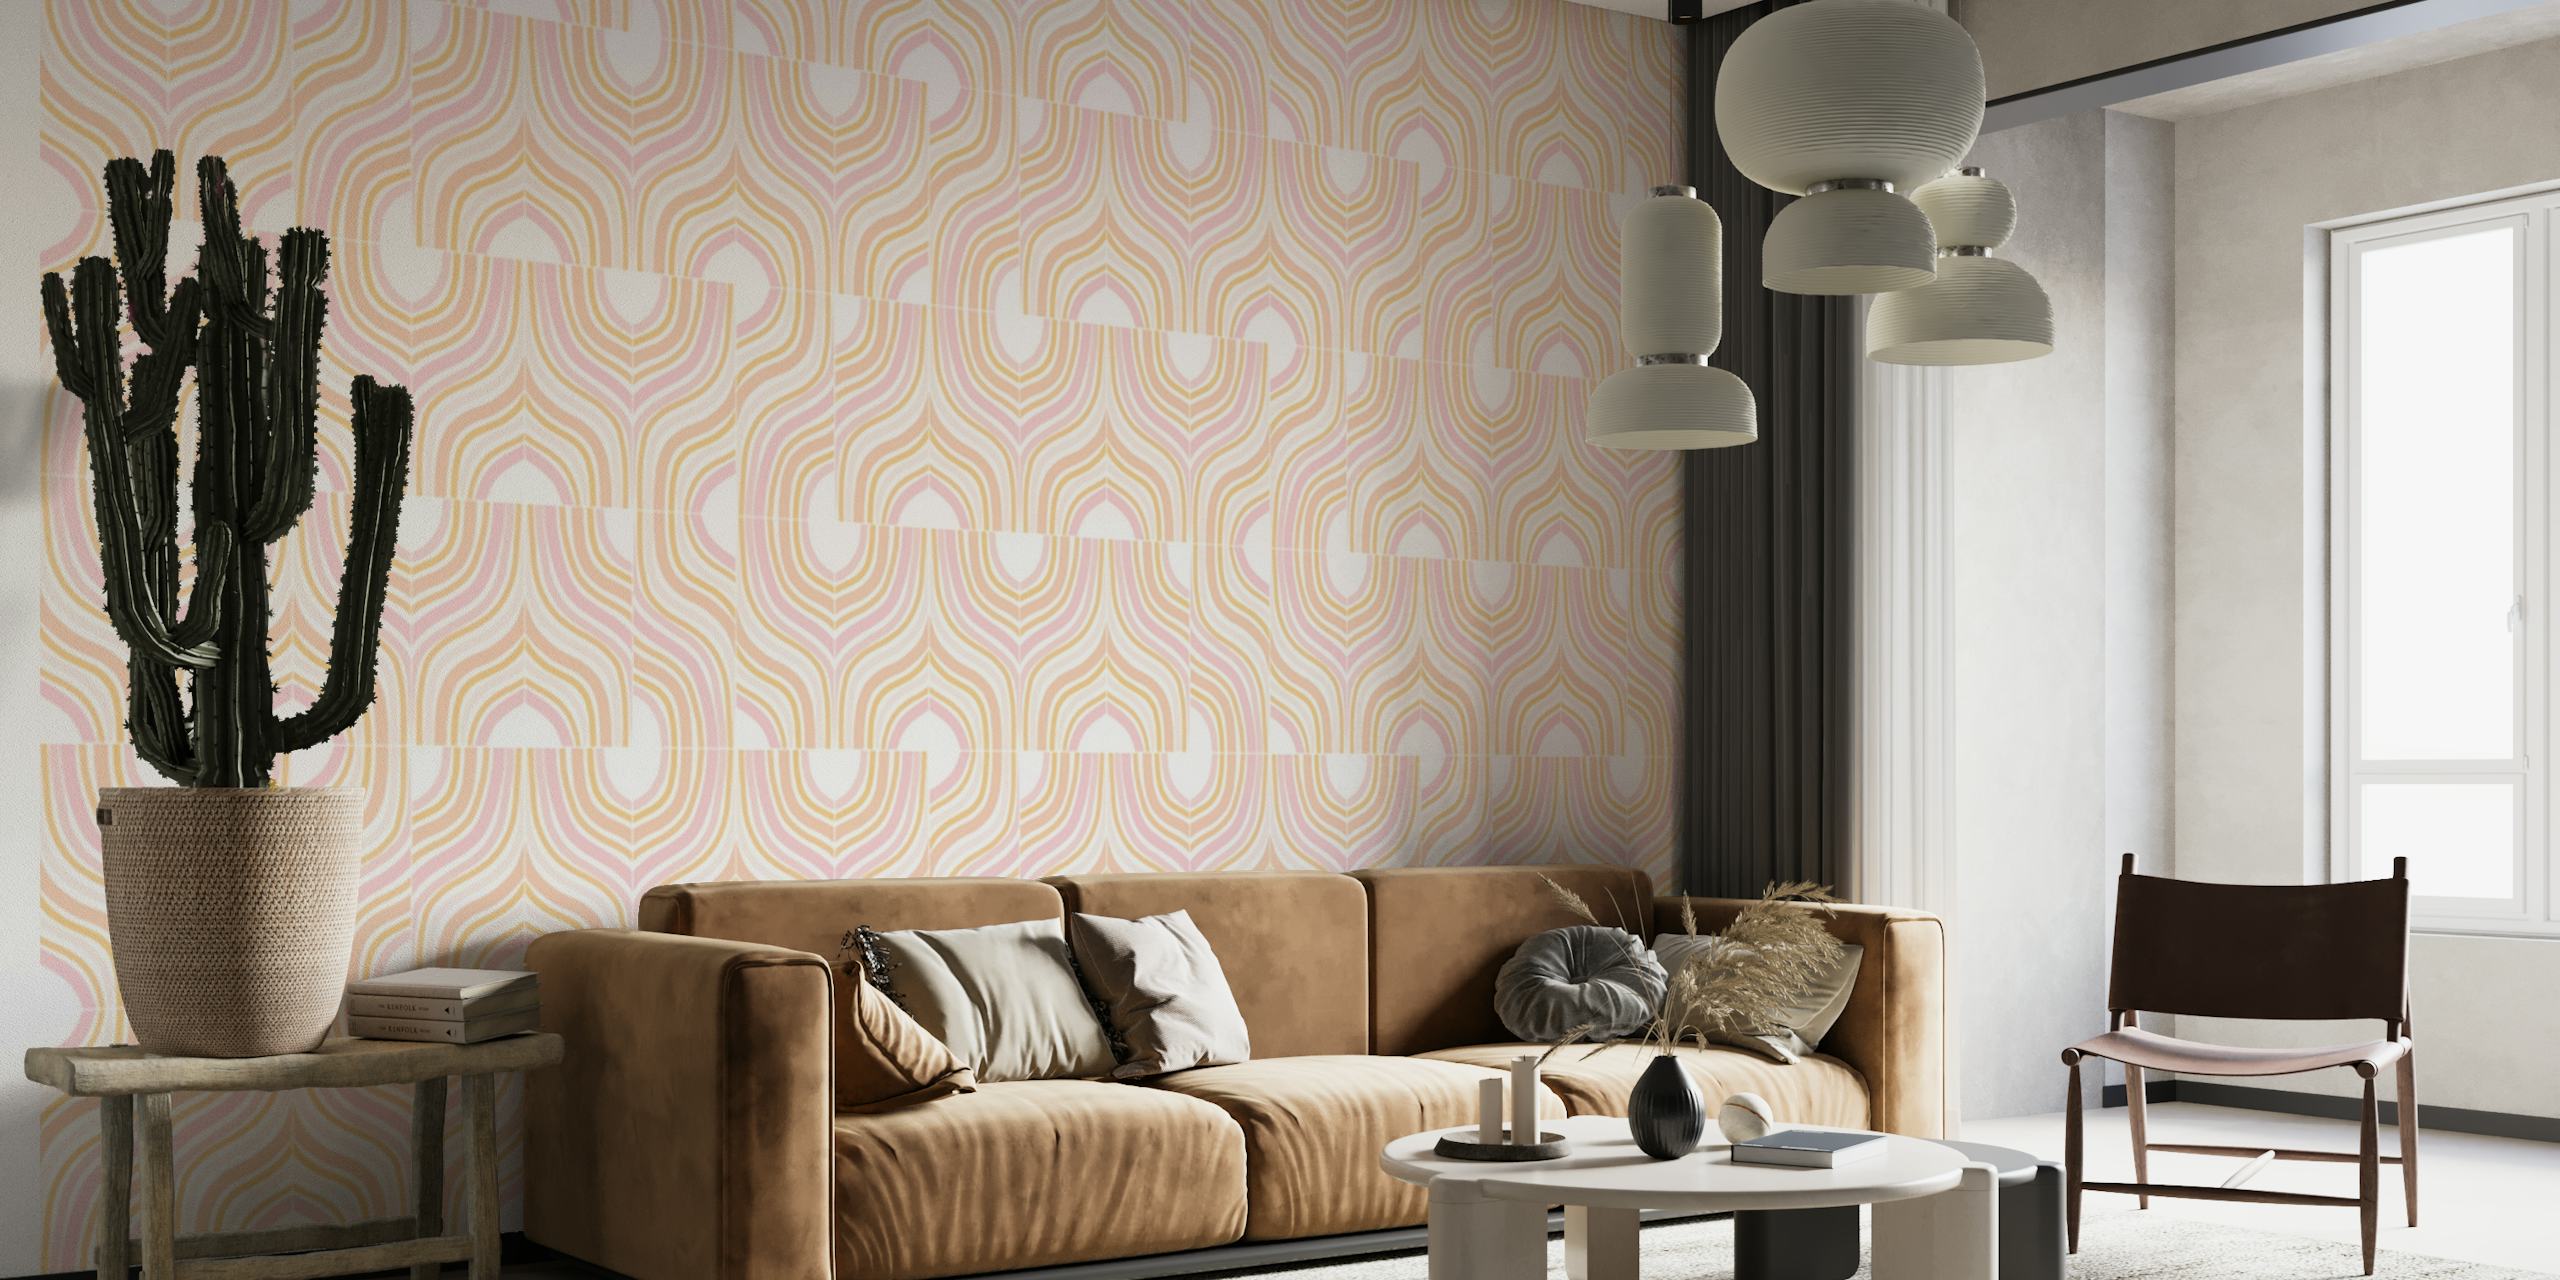 Peachy Mixed Marbled Tiles ταπετσαρία